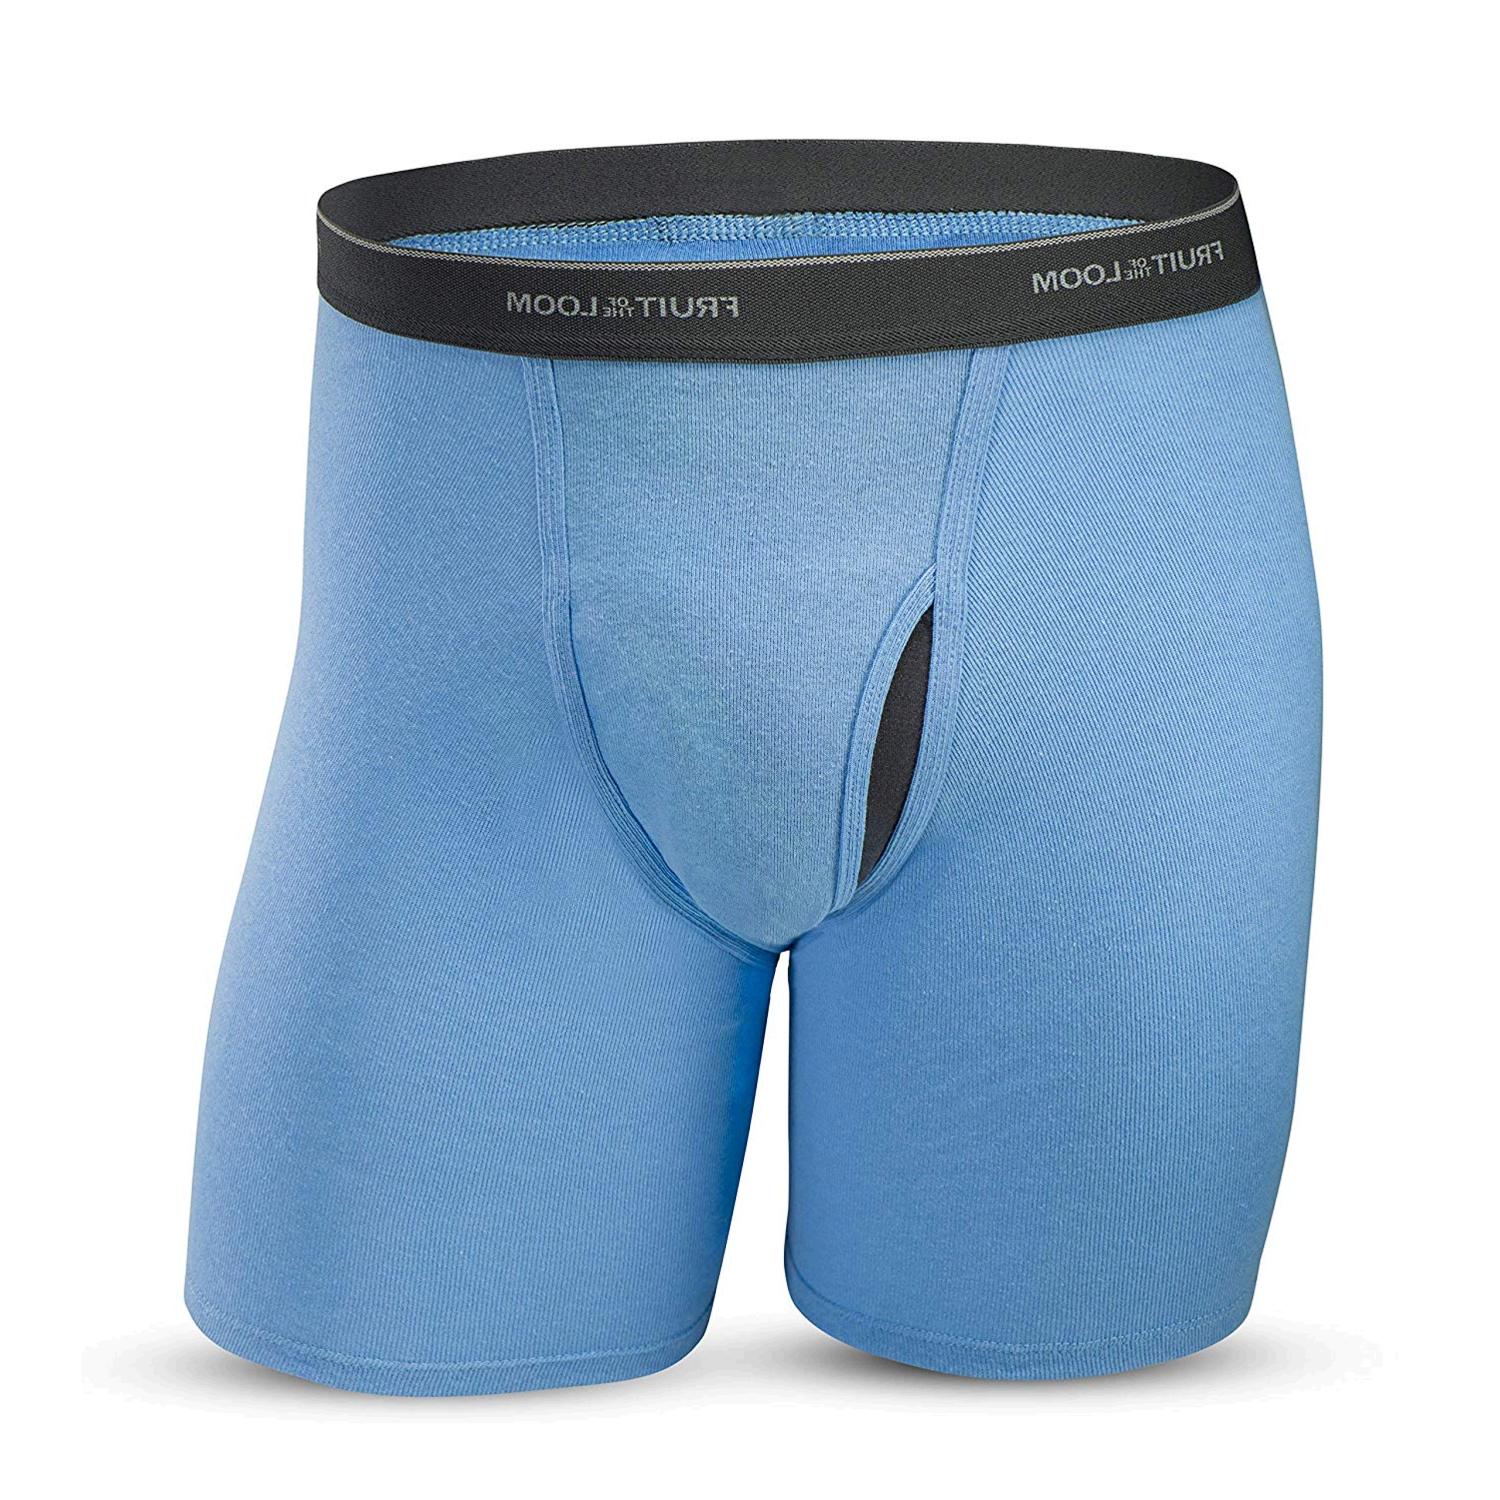 fruit of the loom boxer briefs